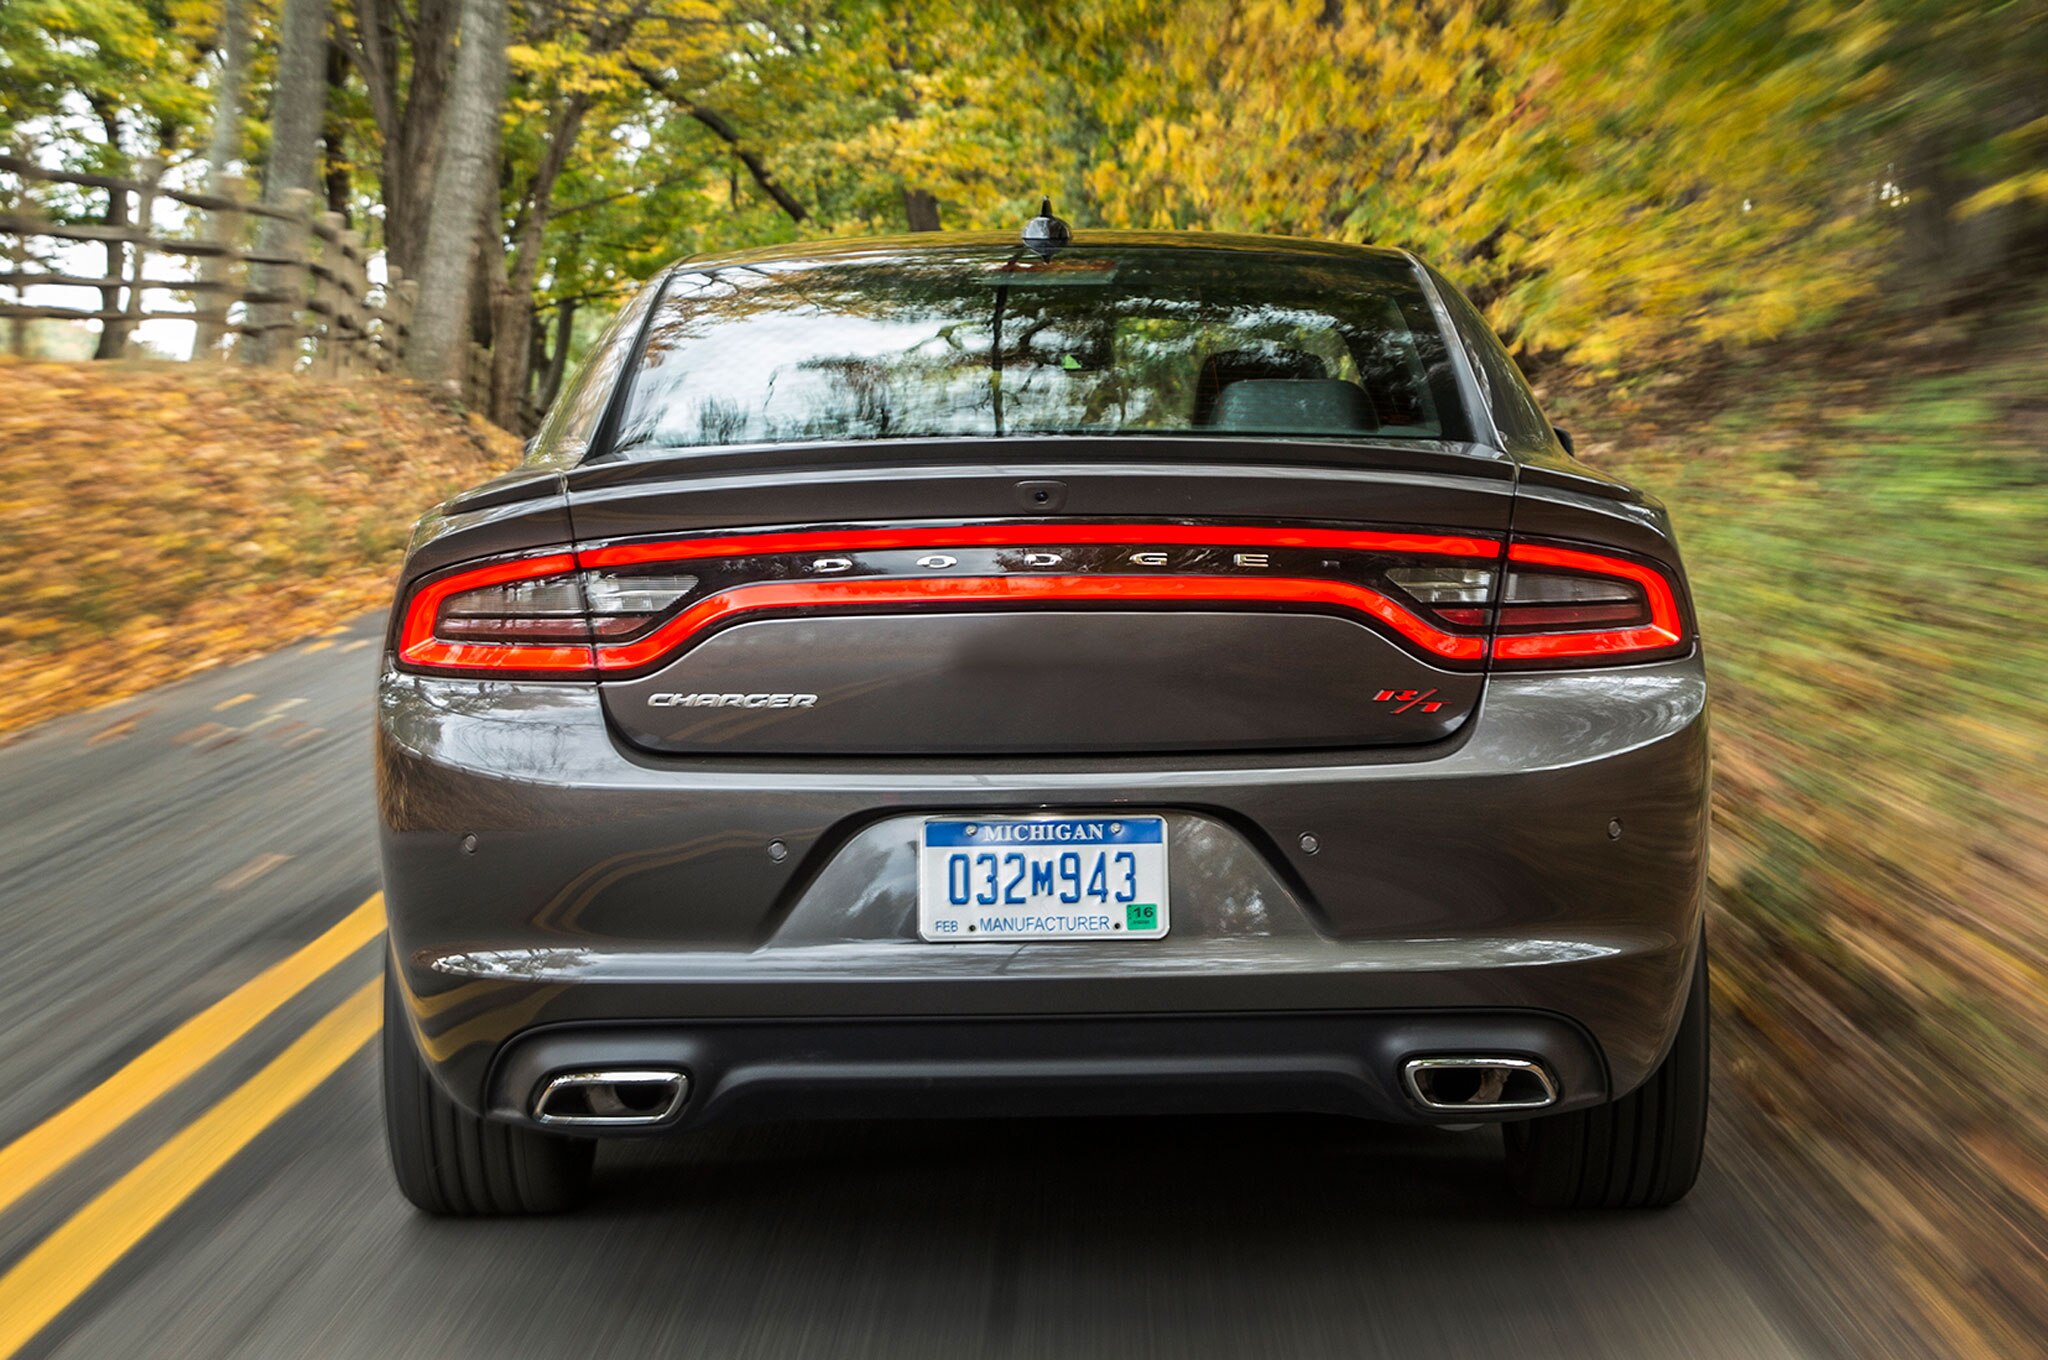 2015-Dodge-Charger-RT-rear-view-in-motion-1.jpg